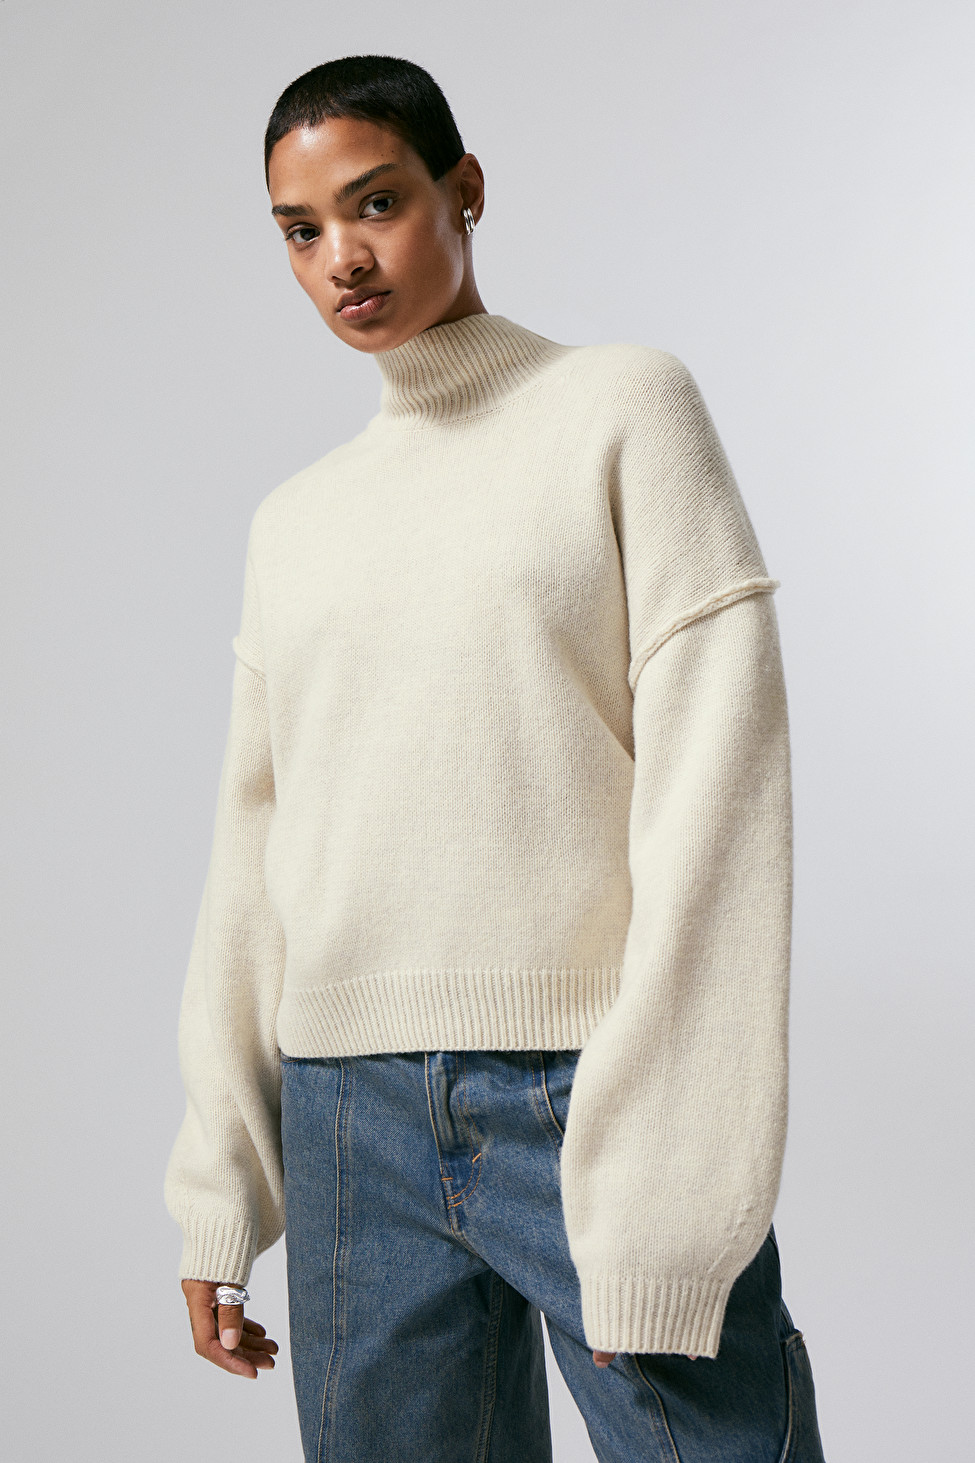 The 30 Best Cream Jumpers to Buy for Every Budget | Who What Wear UK